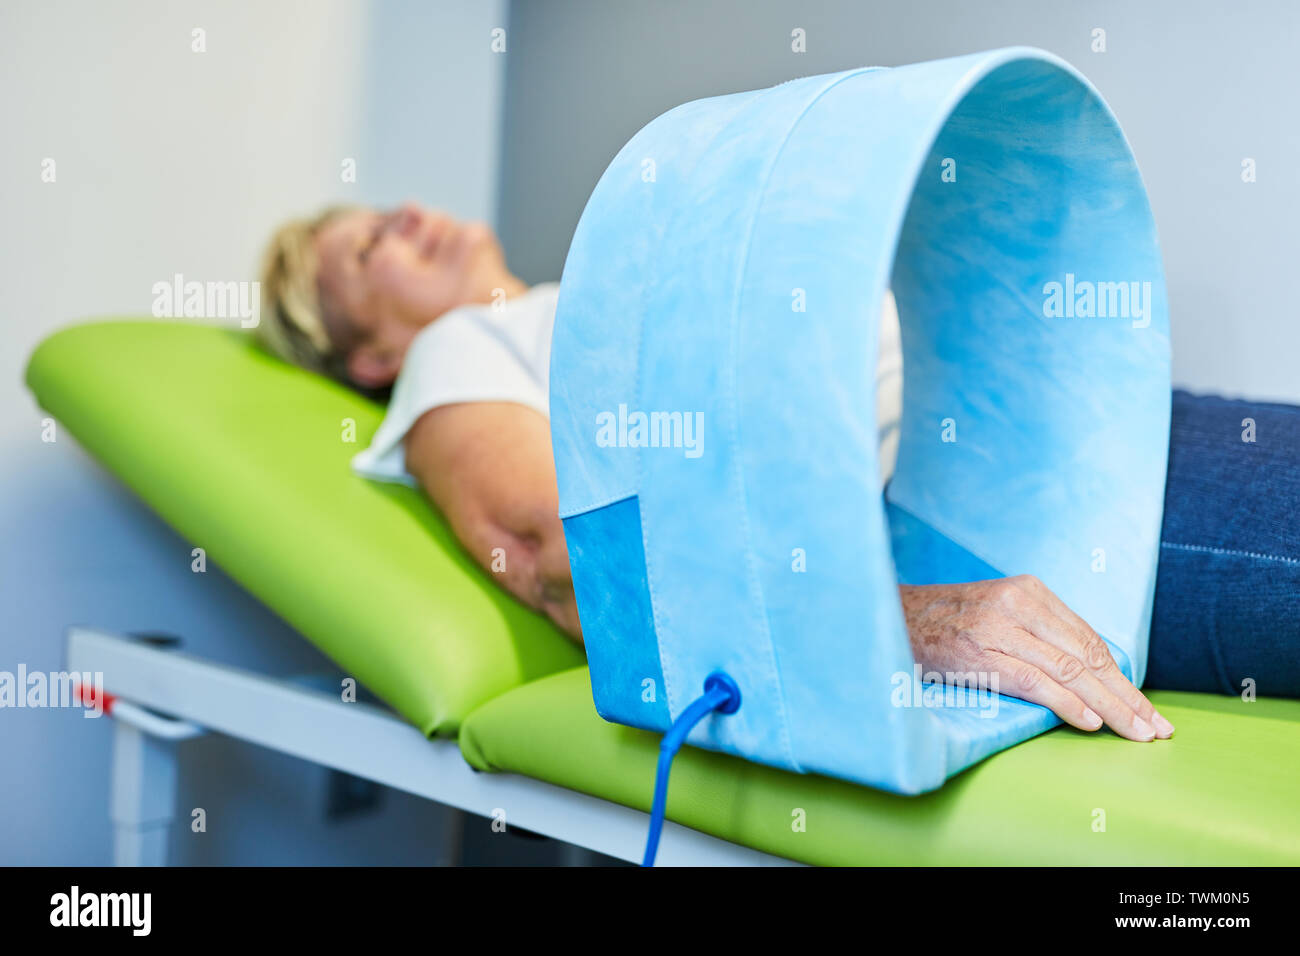 Senior gets Magnetic Therapy on the wrist as a naturopathy procedure at the Naturopath Stock Photo